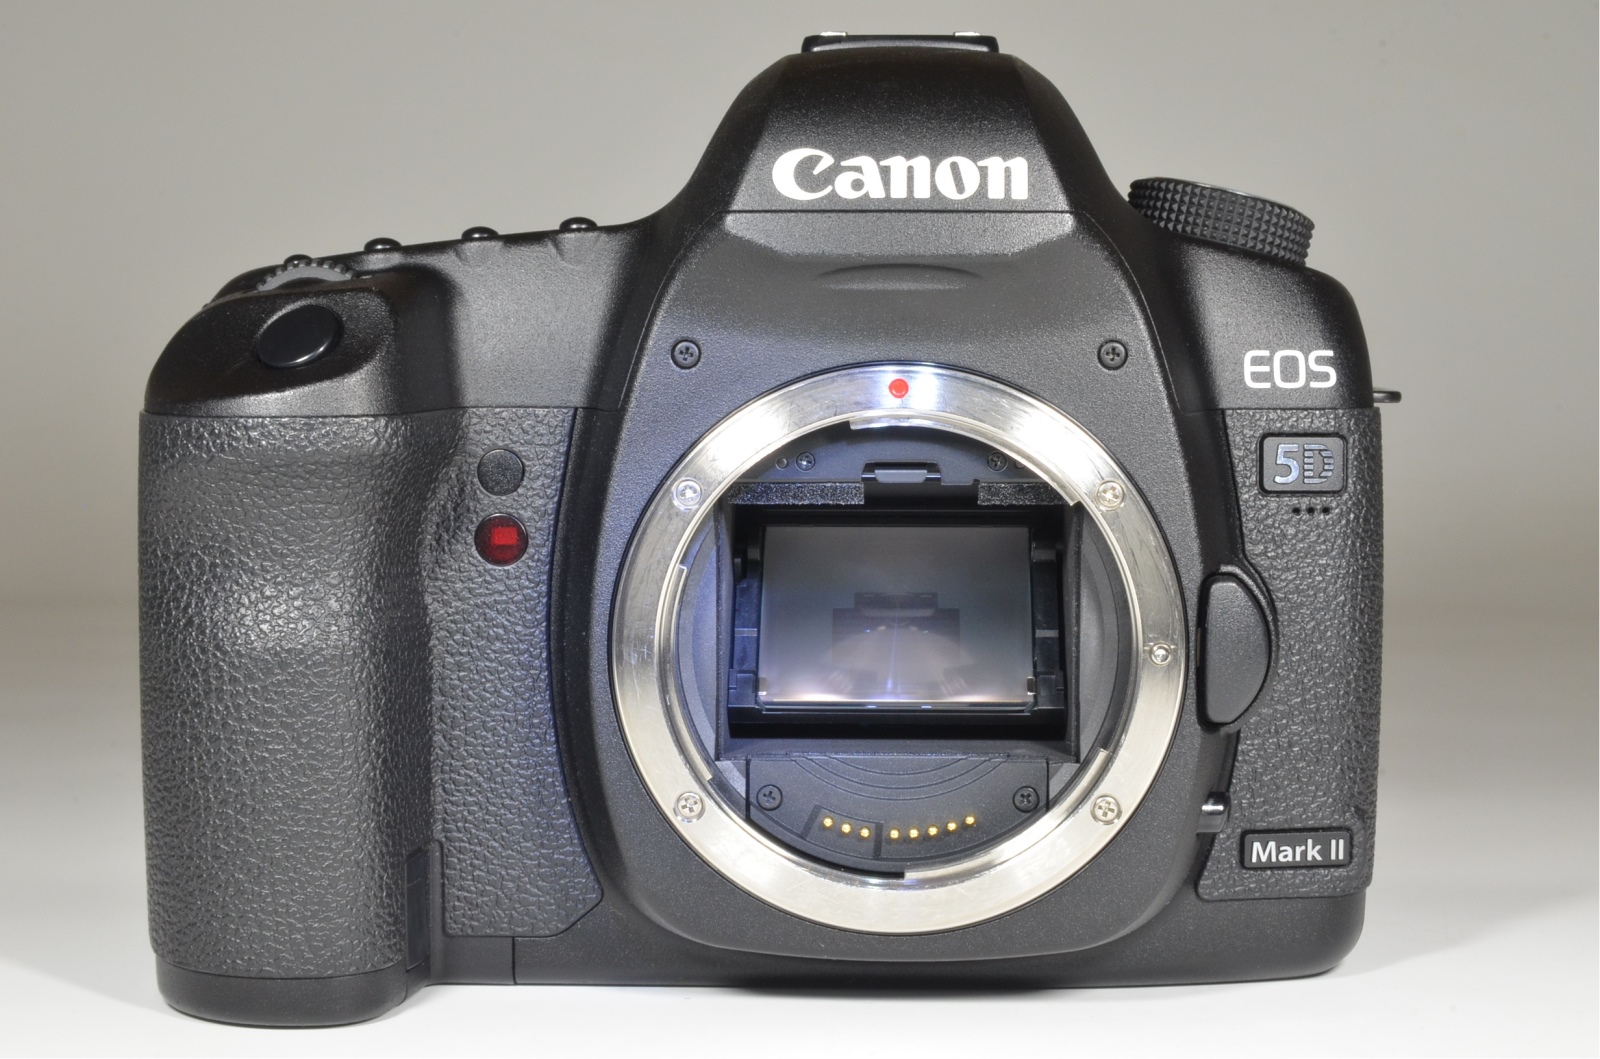 canon eos 5d mark ii with ef 28-135mm f3.5-5.6 is usm